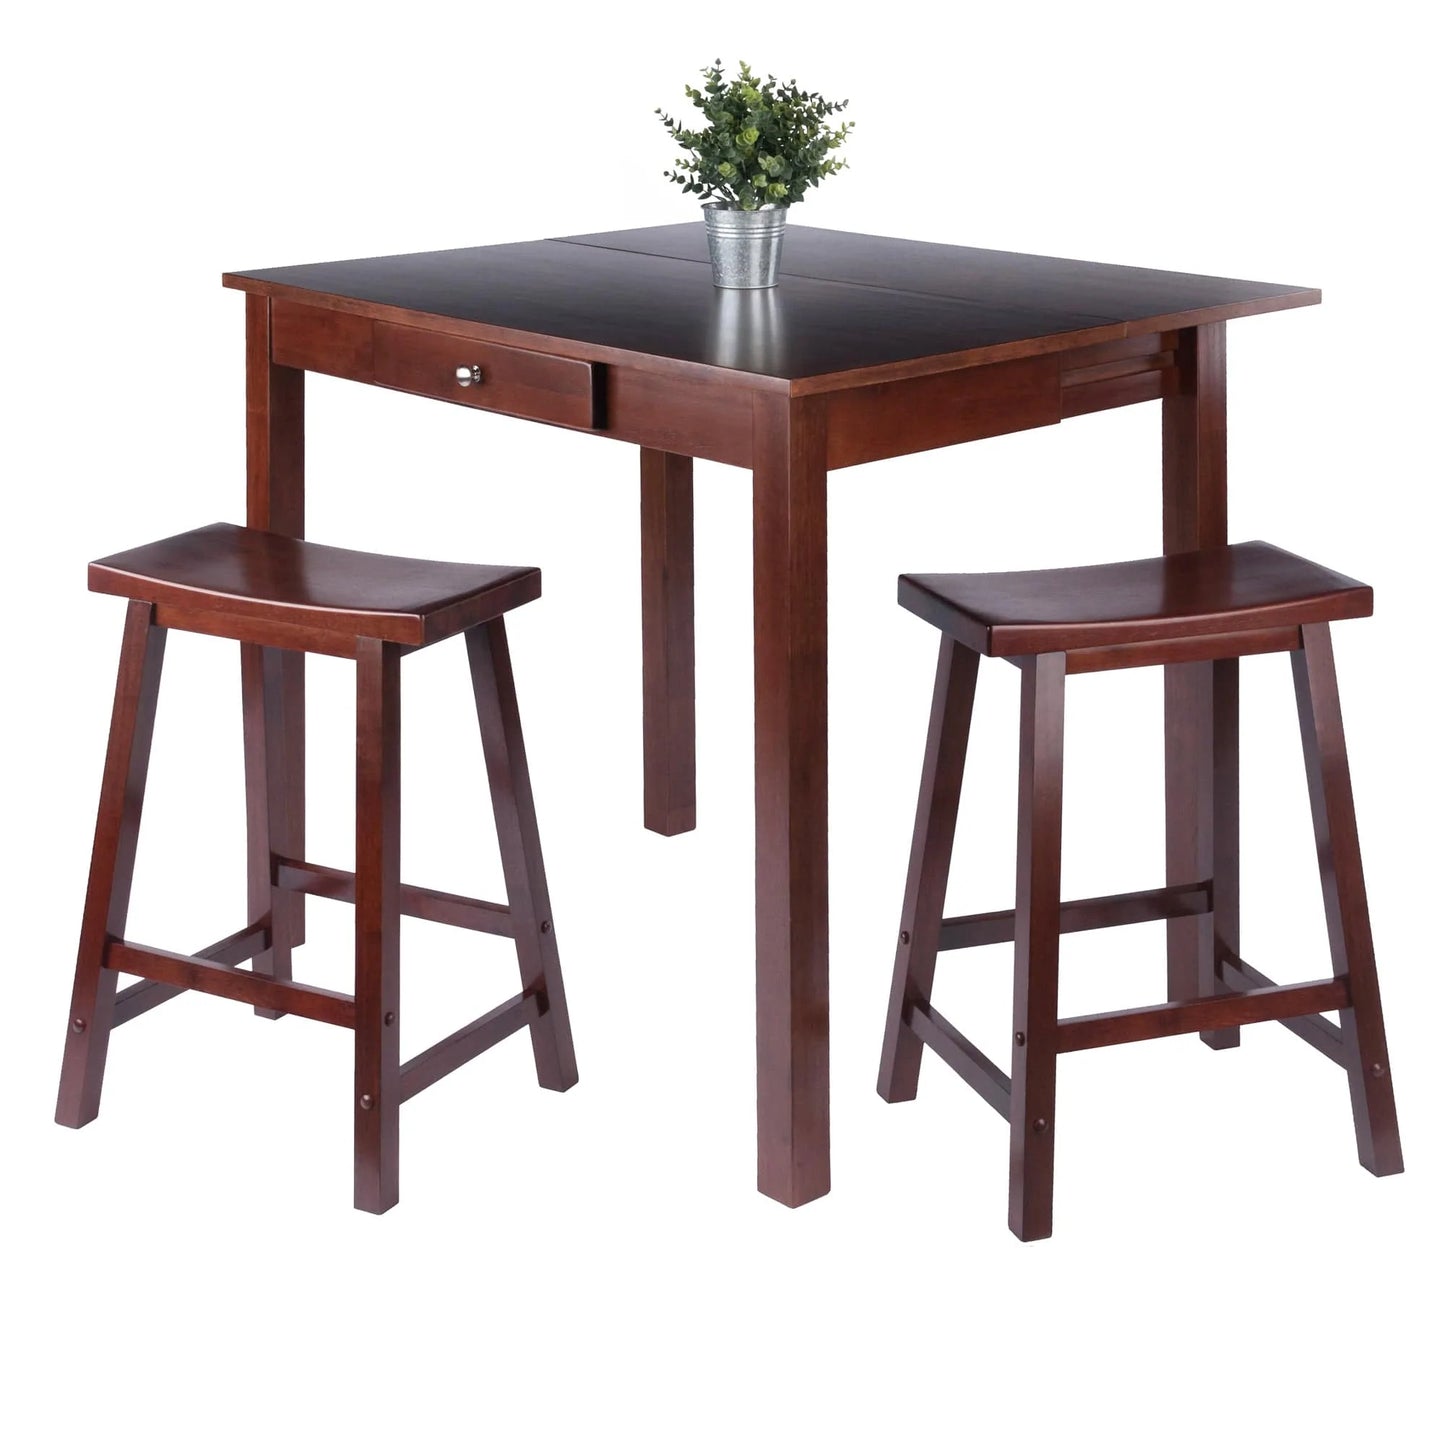 WINSOME Pub Table Set Perrone 3-Pc High Drop Leaf Table with Saddle Seat Counter Stools, Walnut